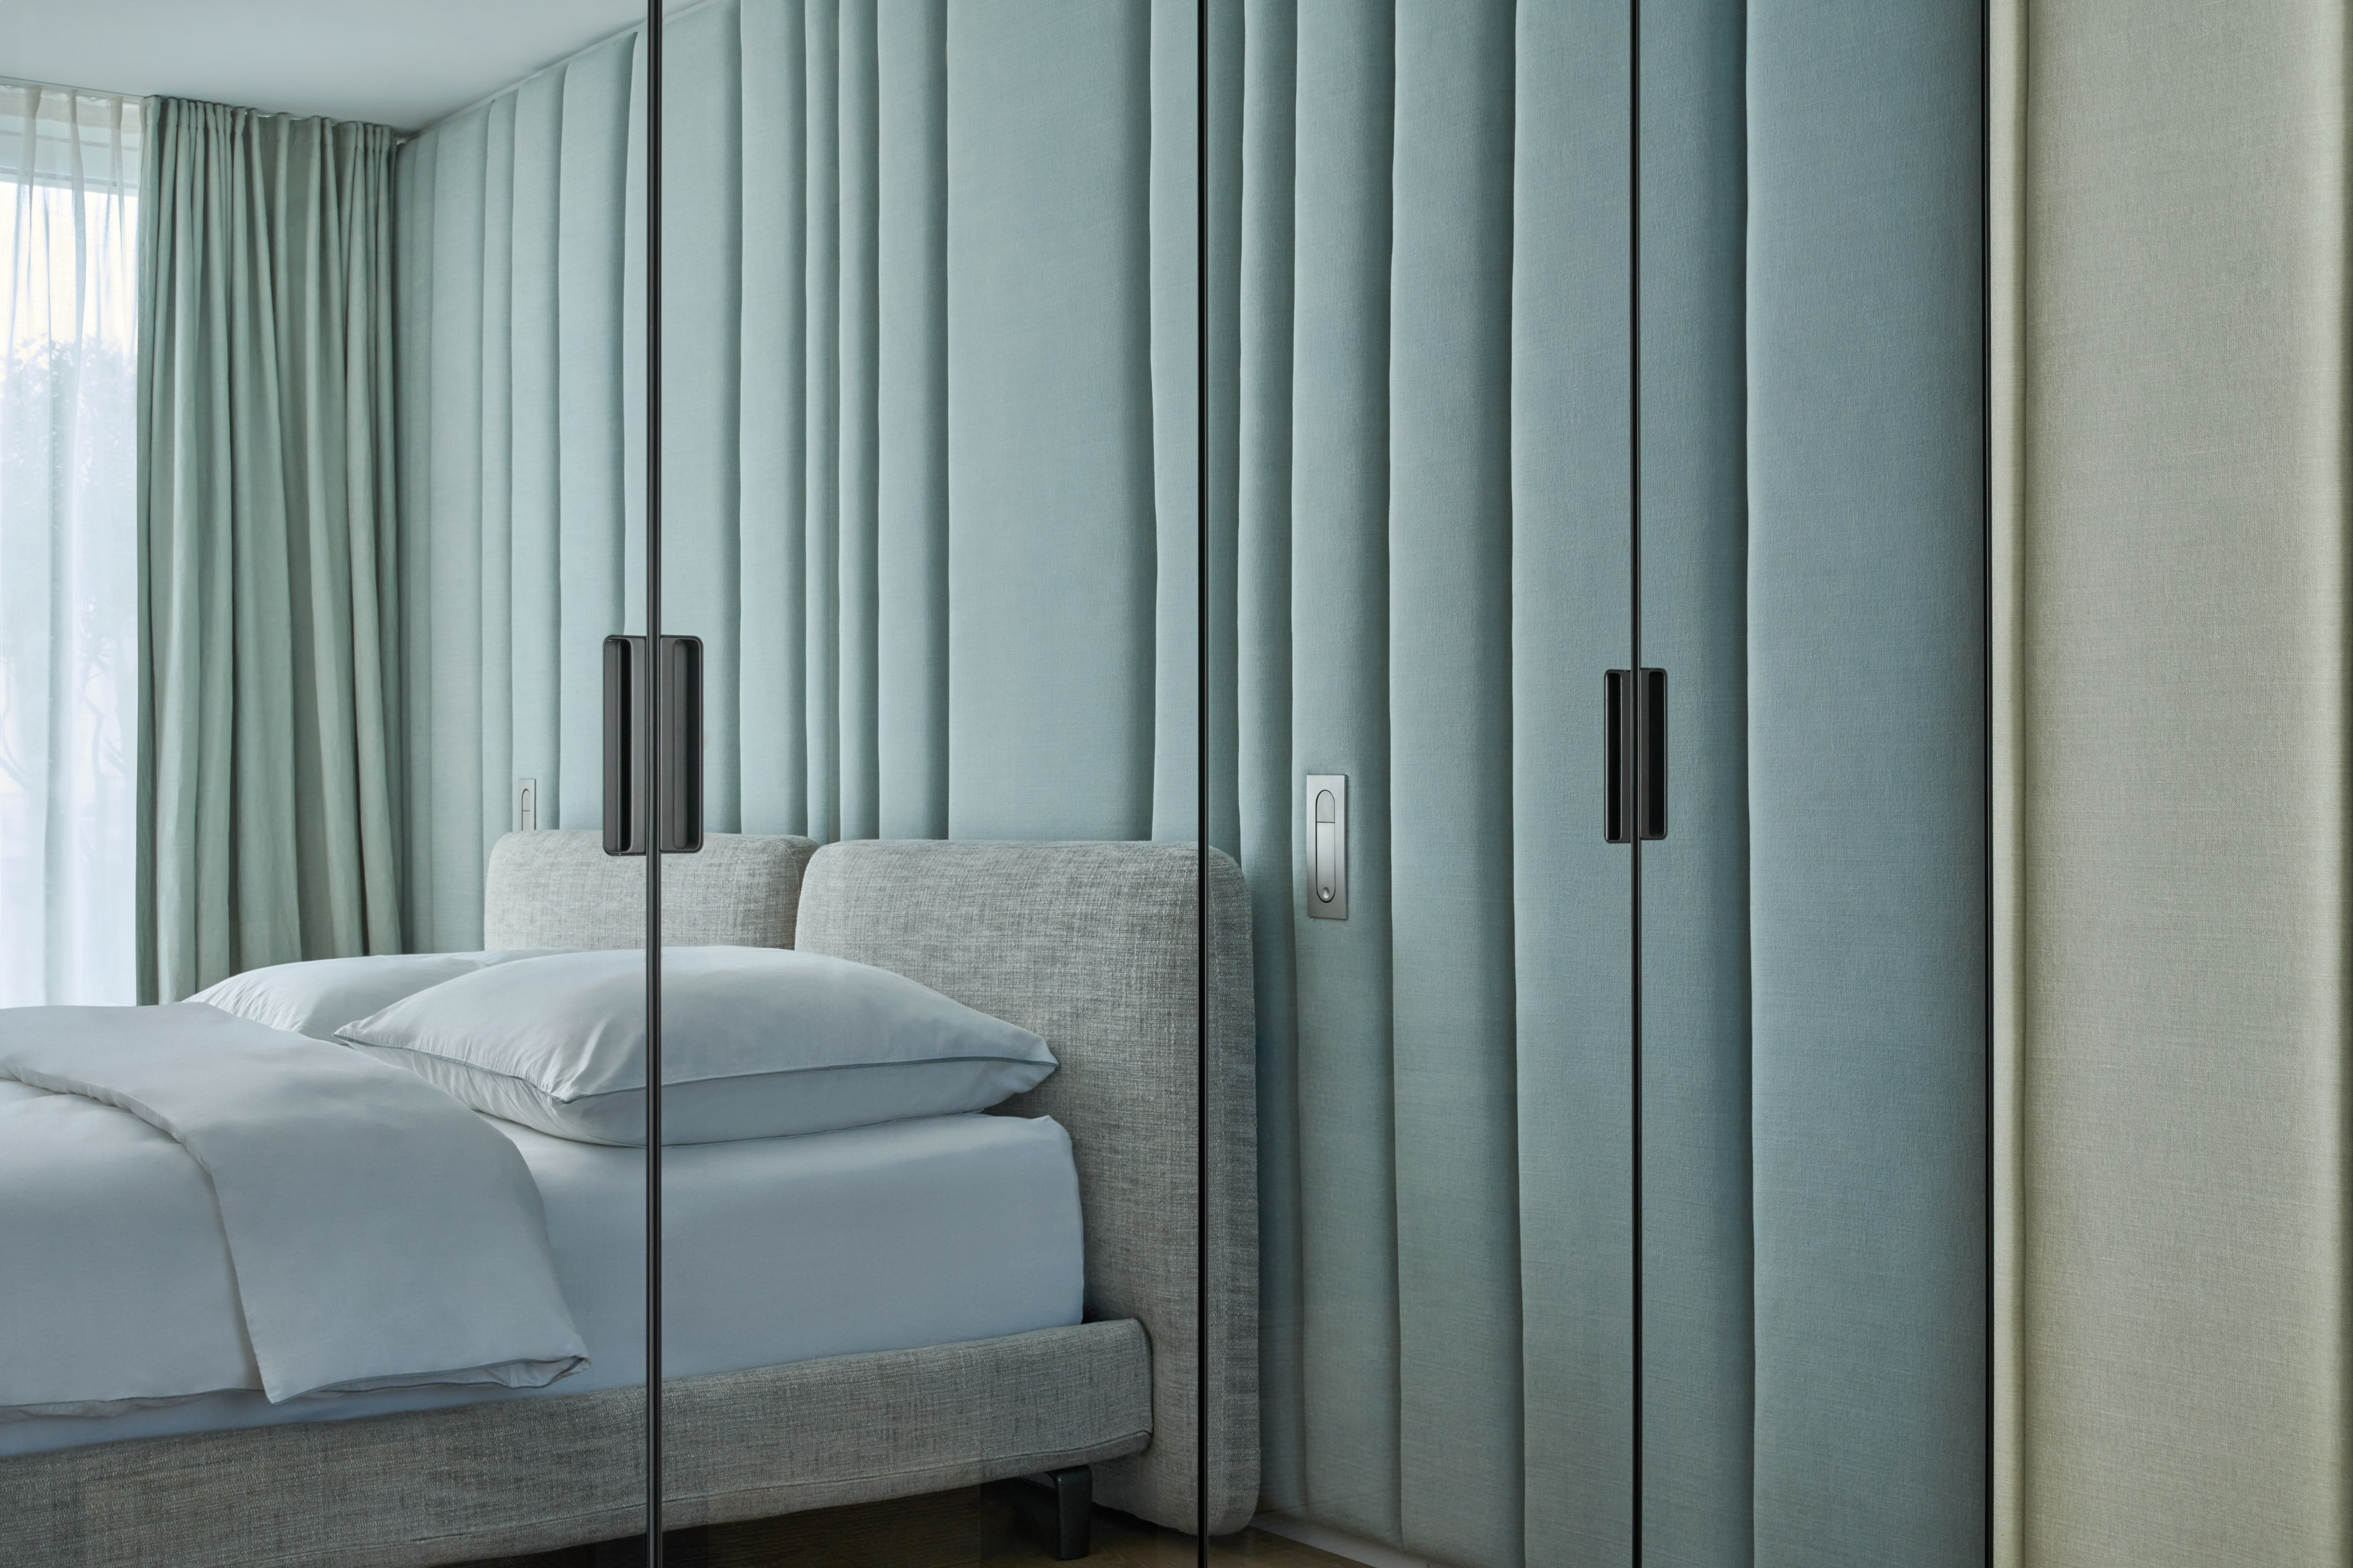 Rimadesio padded fabric wall guest bedroom Kirkby design by romo minotti bed